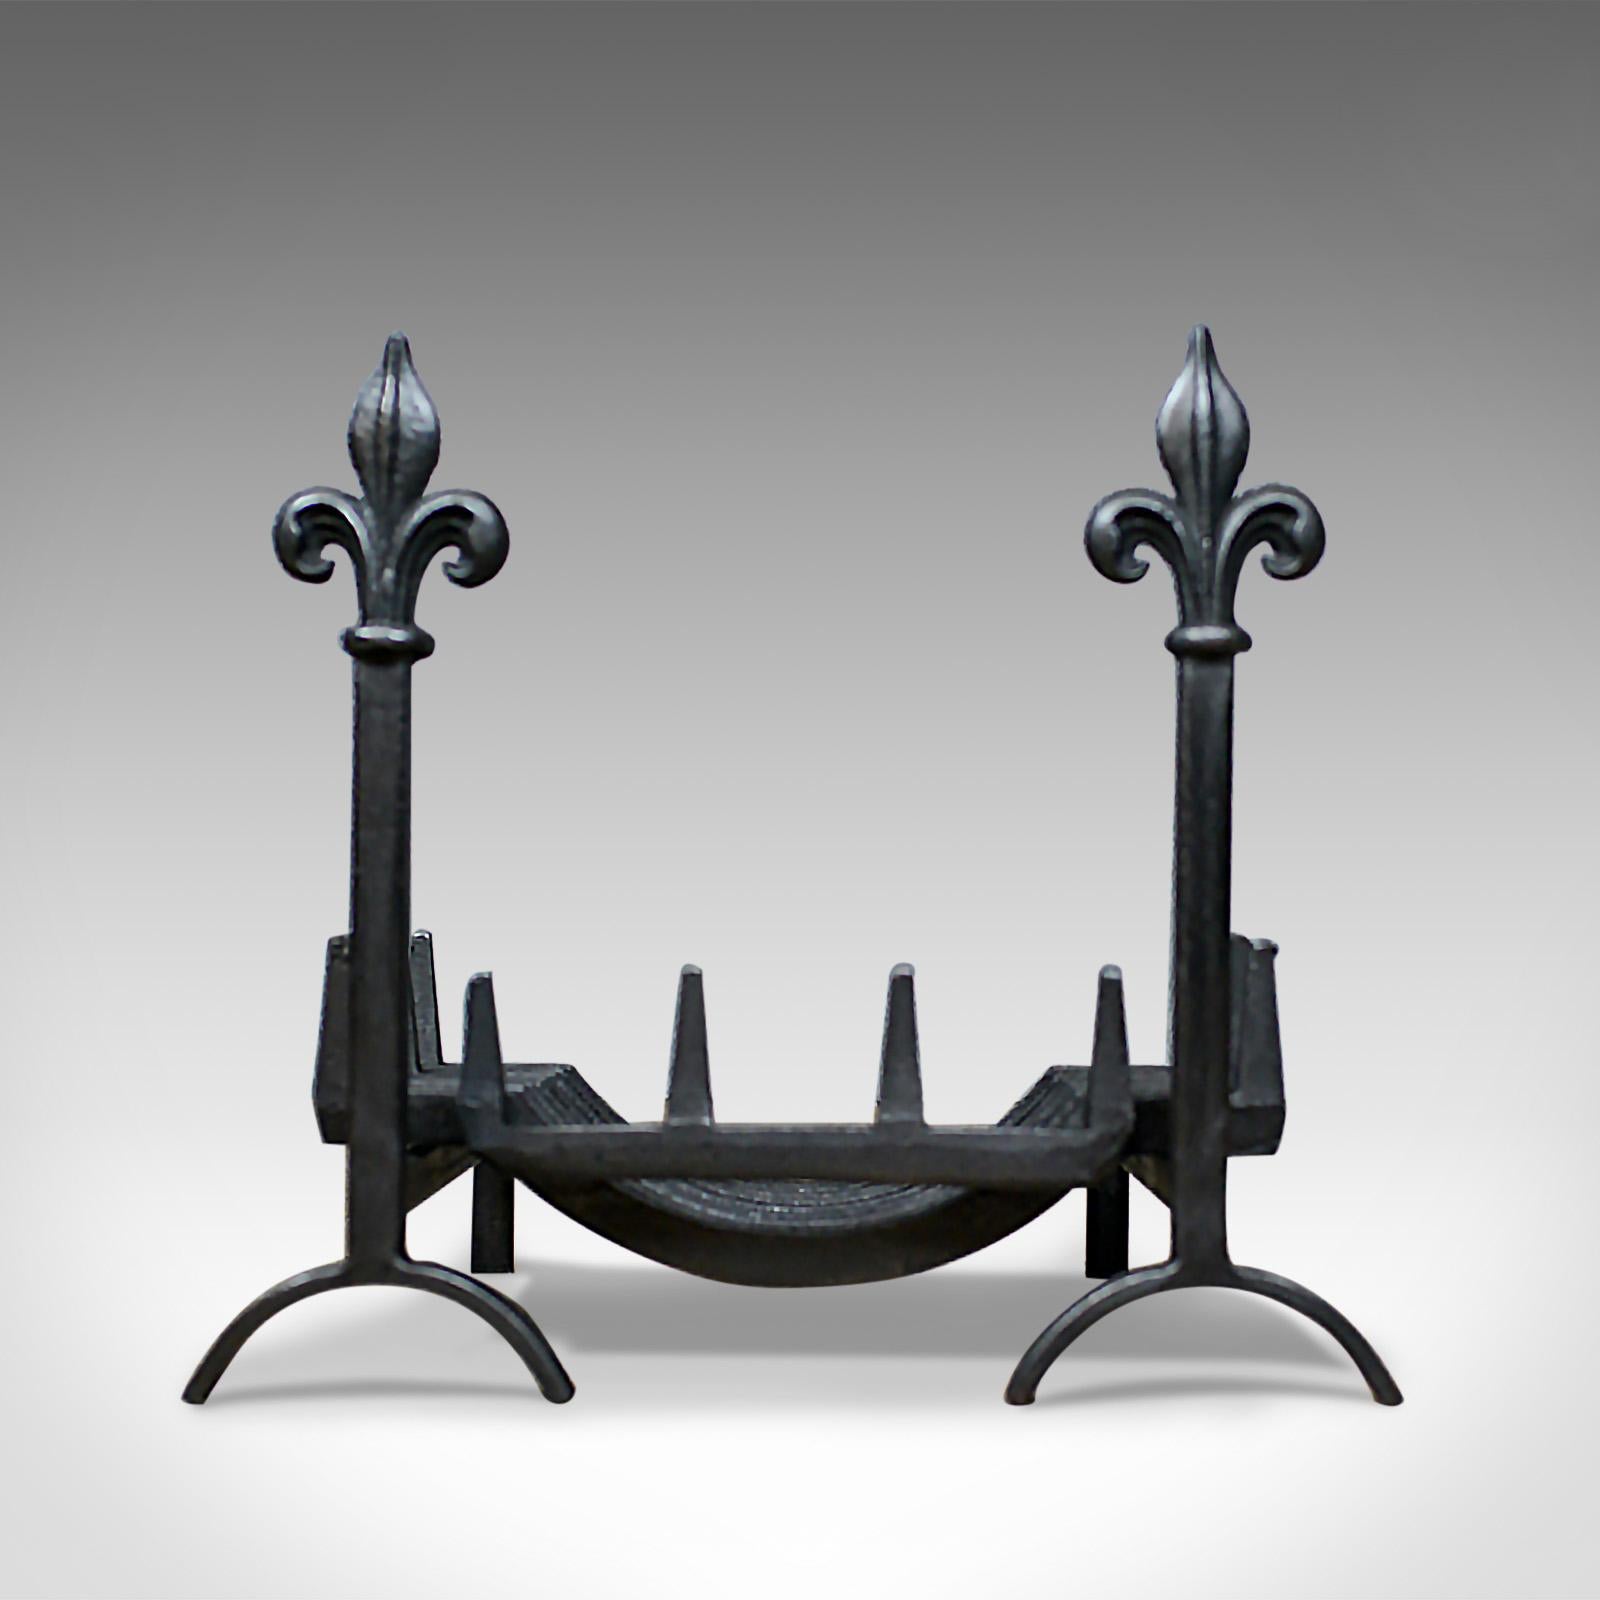 This is an antique fire basket, or grate, on dogs, or andirons, an English, Victorian fireplace accessory dating to the early 20th century, circa 1900.

A quality grate and dogs in attractive hand forged and cast iron
Standing on arched andirons